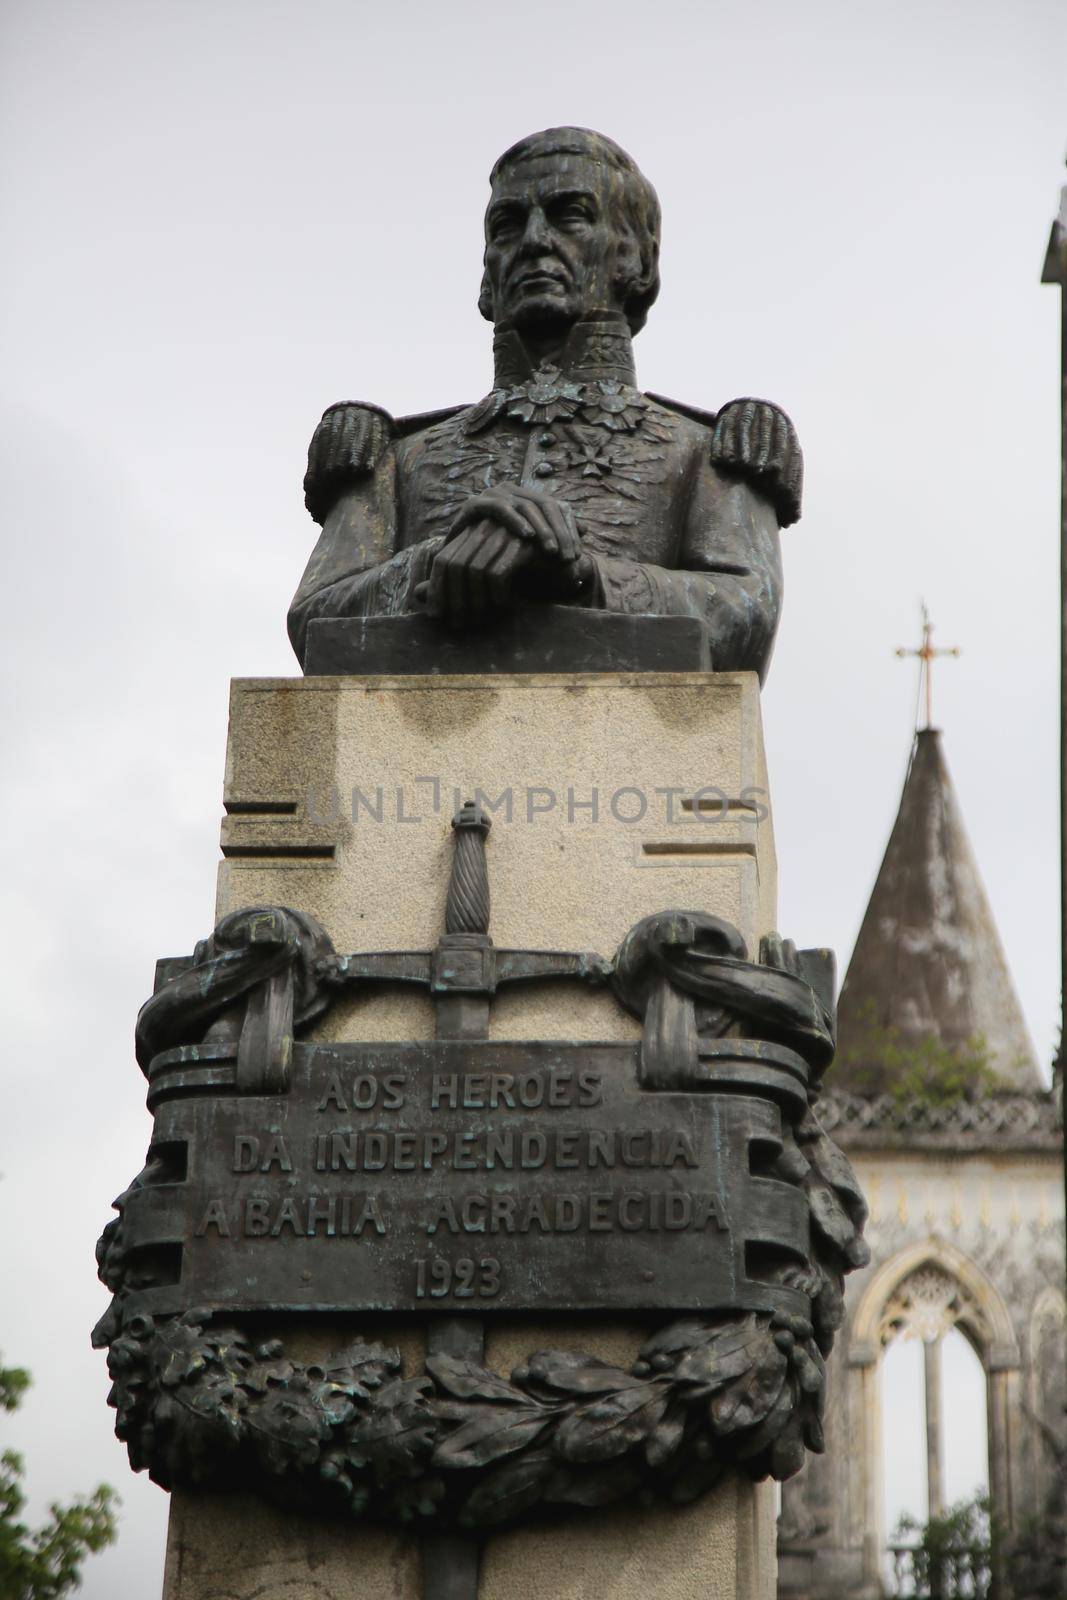 salvador, bahia, brazil - july 2, 2021: statue of General Pierre Labatut, or Pedro Labatut, seen in the city of Salvador. He organized the so-called Pacifying Army during Bahia's independence.